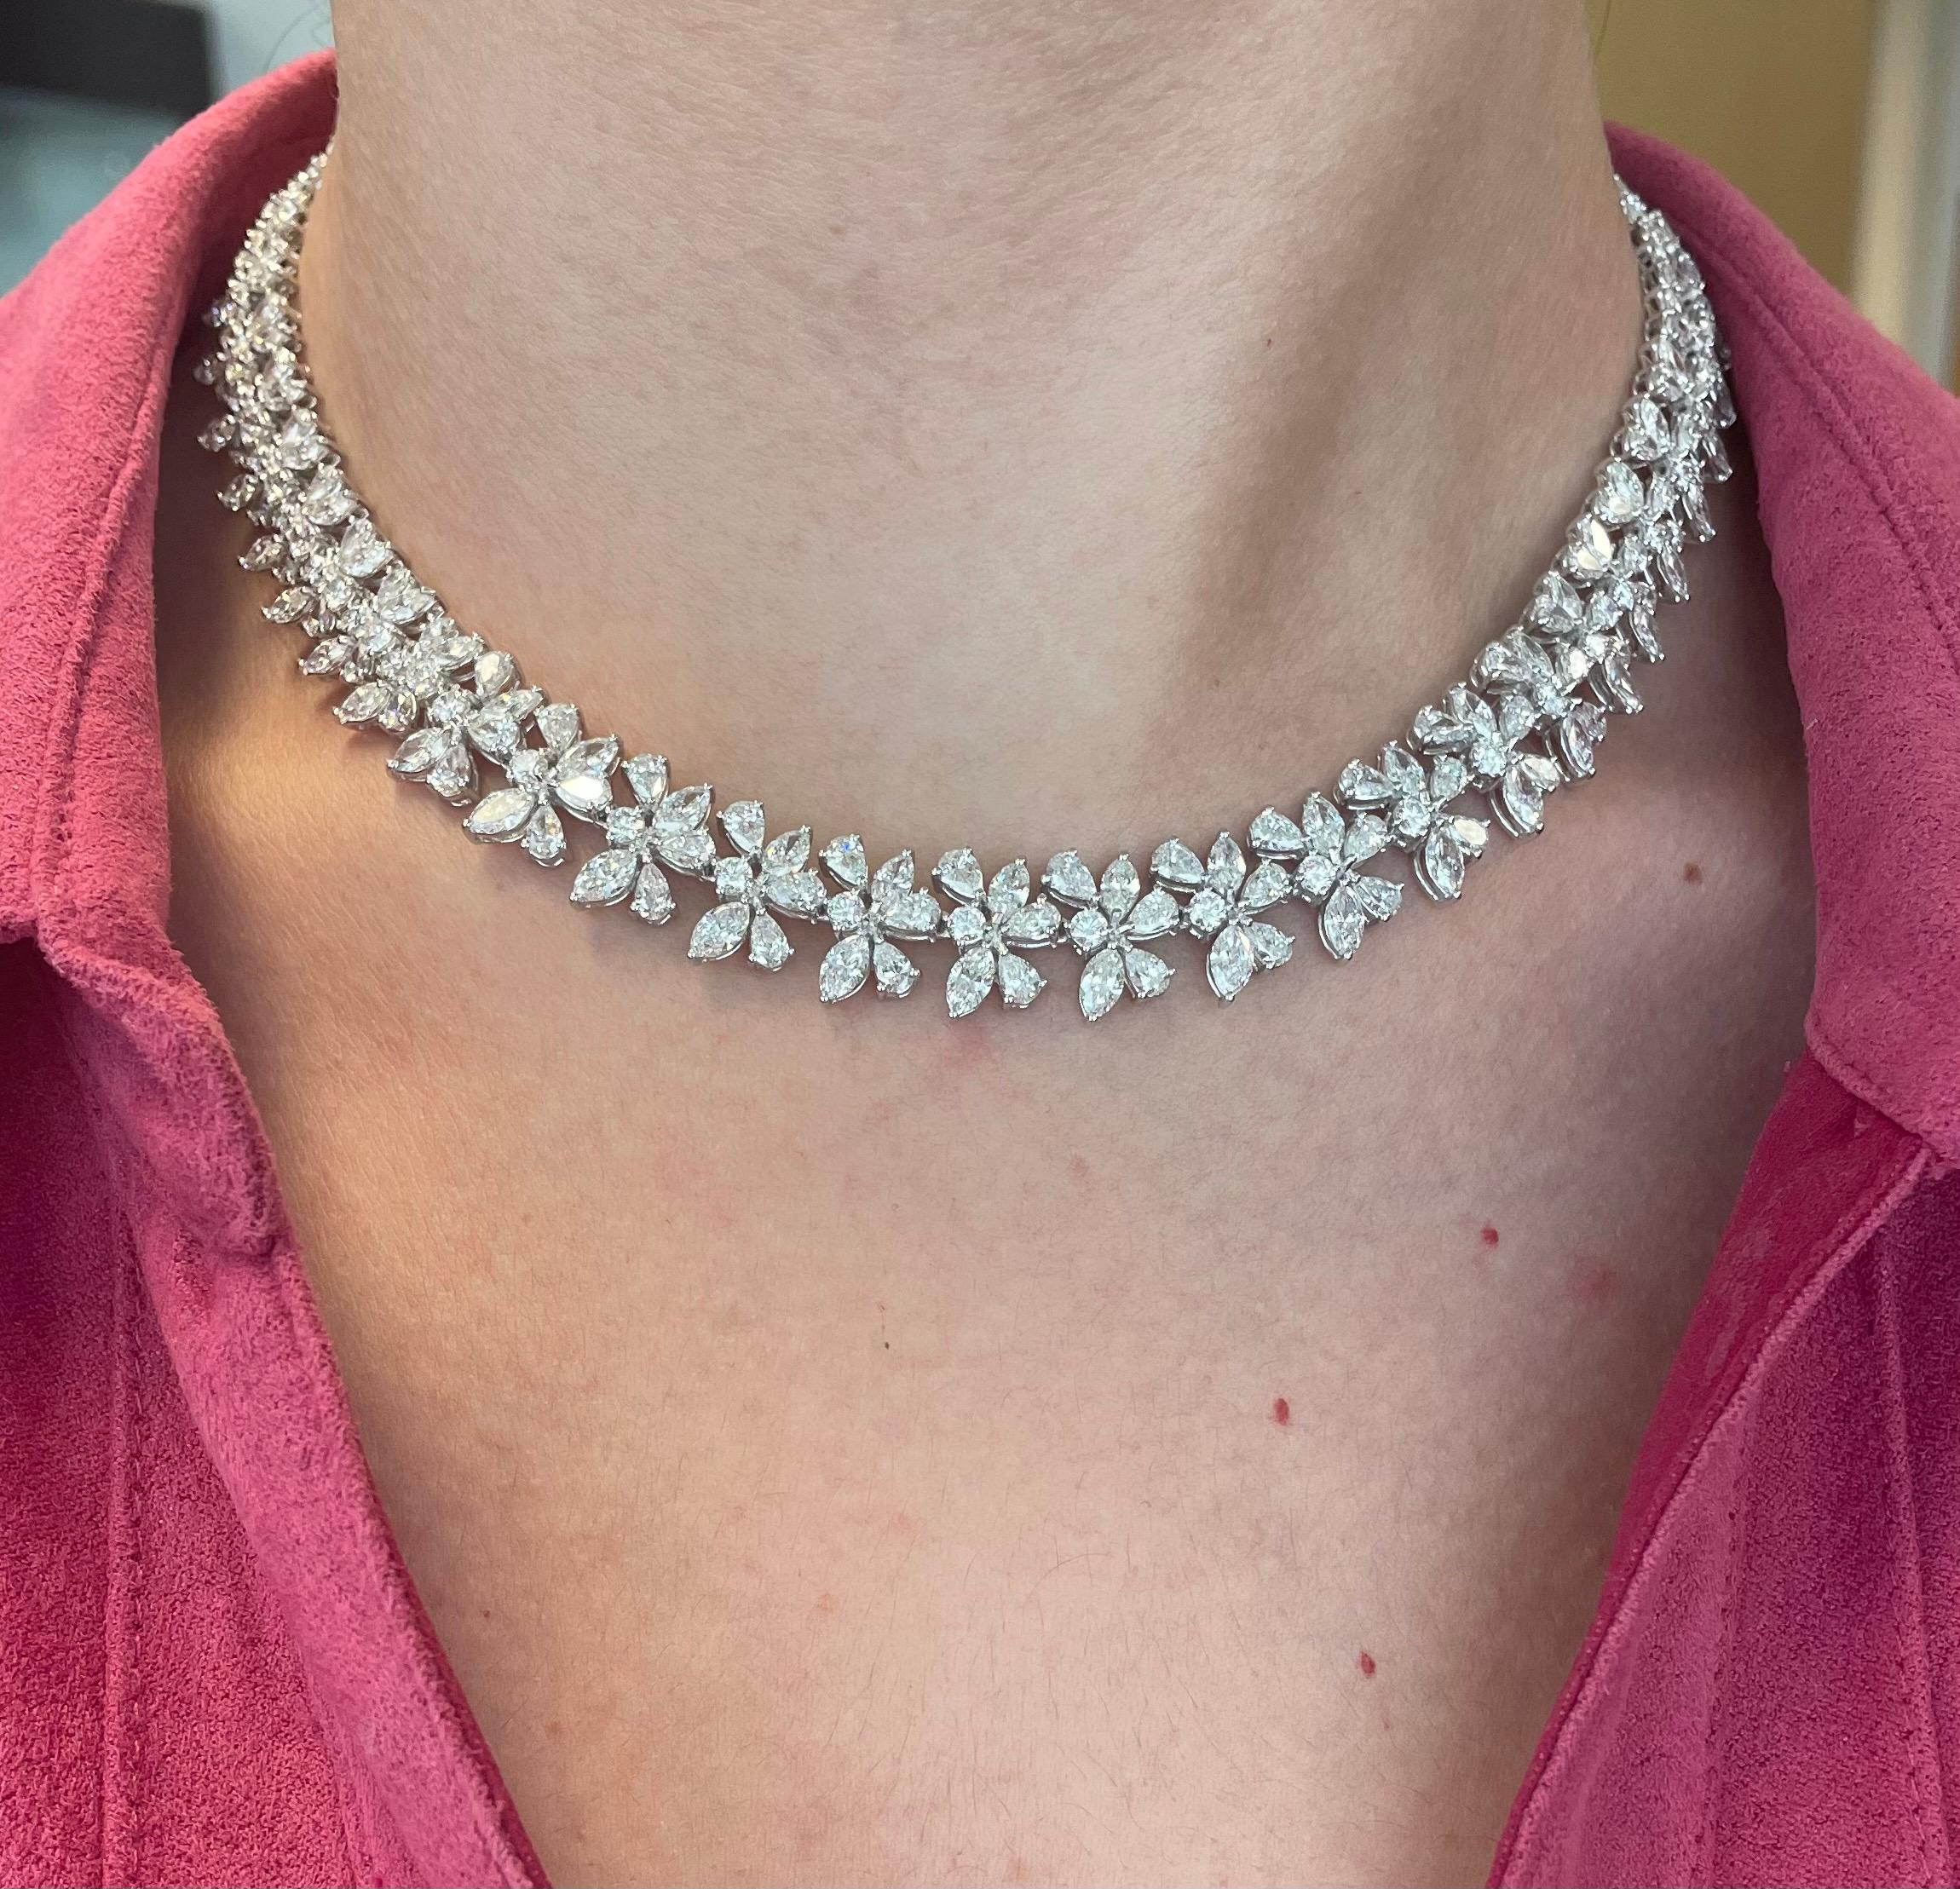 Exquisite multi diamond necklace. Perfect as a wedding / bridal necklace. High jewelry by Alexander Beverly Hills.
312 round, marques, and pear cut diamonds, 33.65 carats total. Approximately G/H color and VS clarity. Four prong set in 18k white